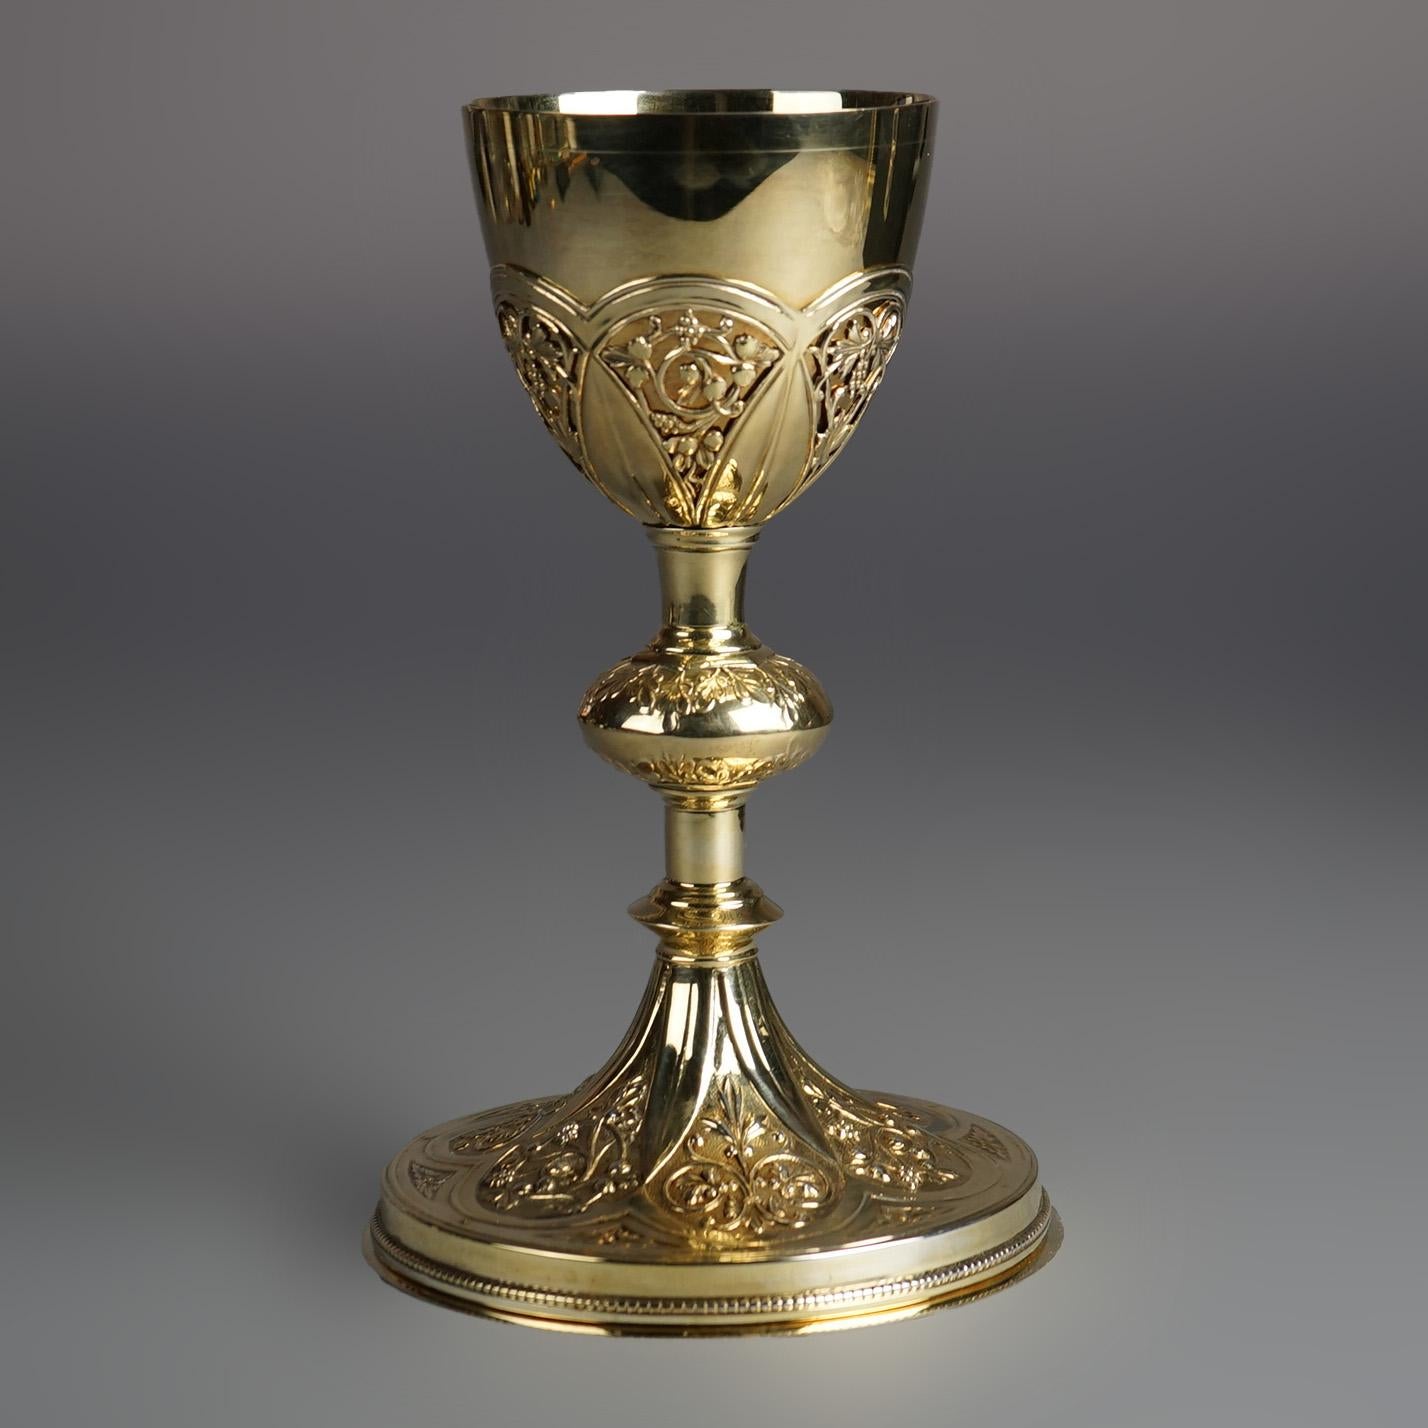 Gold Wash Floral Engraved Silver Religious Offering Chalice with Hallmark & Case, 20th C

Measures- 8.75''H x 5''W x 5''D